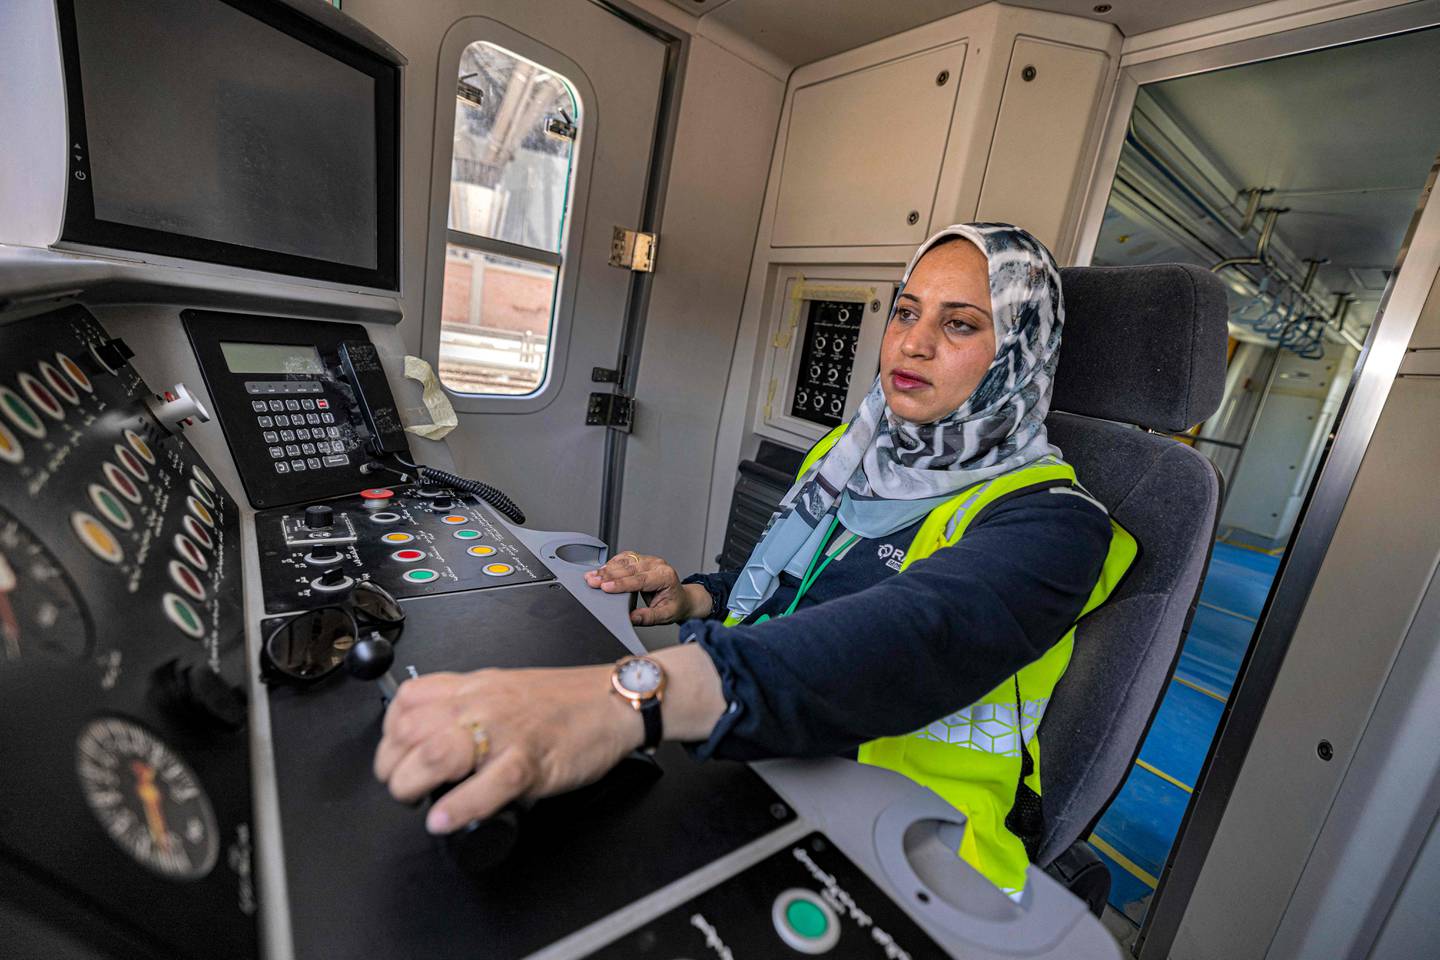 Hind Omar pilots a train simulator at Adly Mansour station in Cairo's suburb of Heliopolis in May. AFP